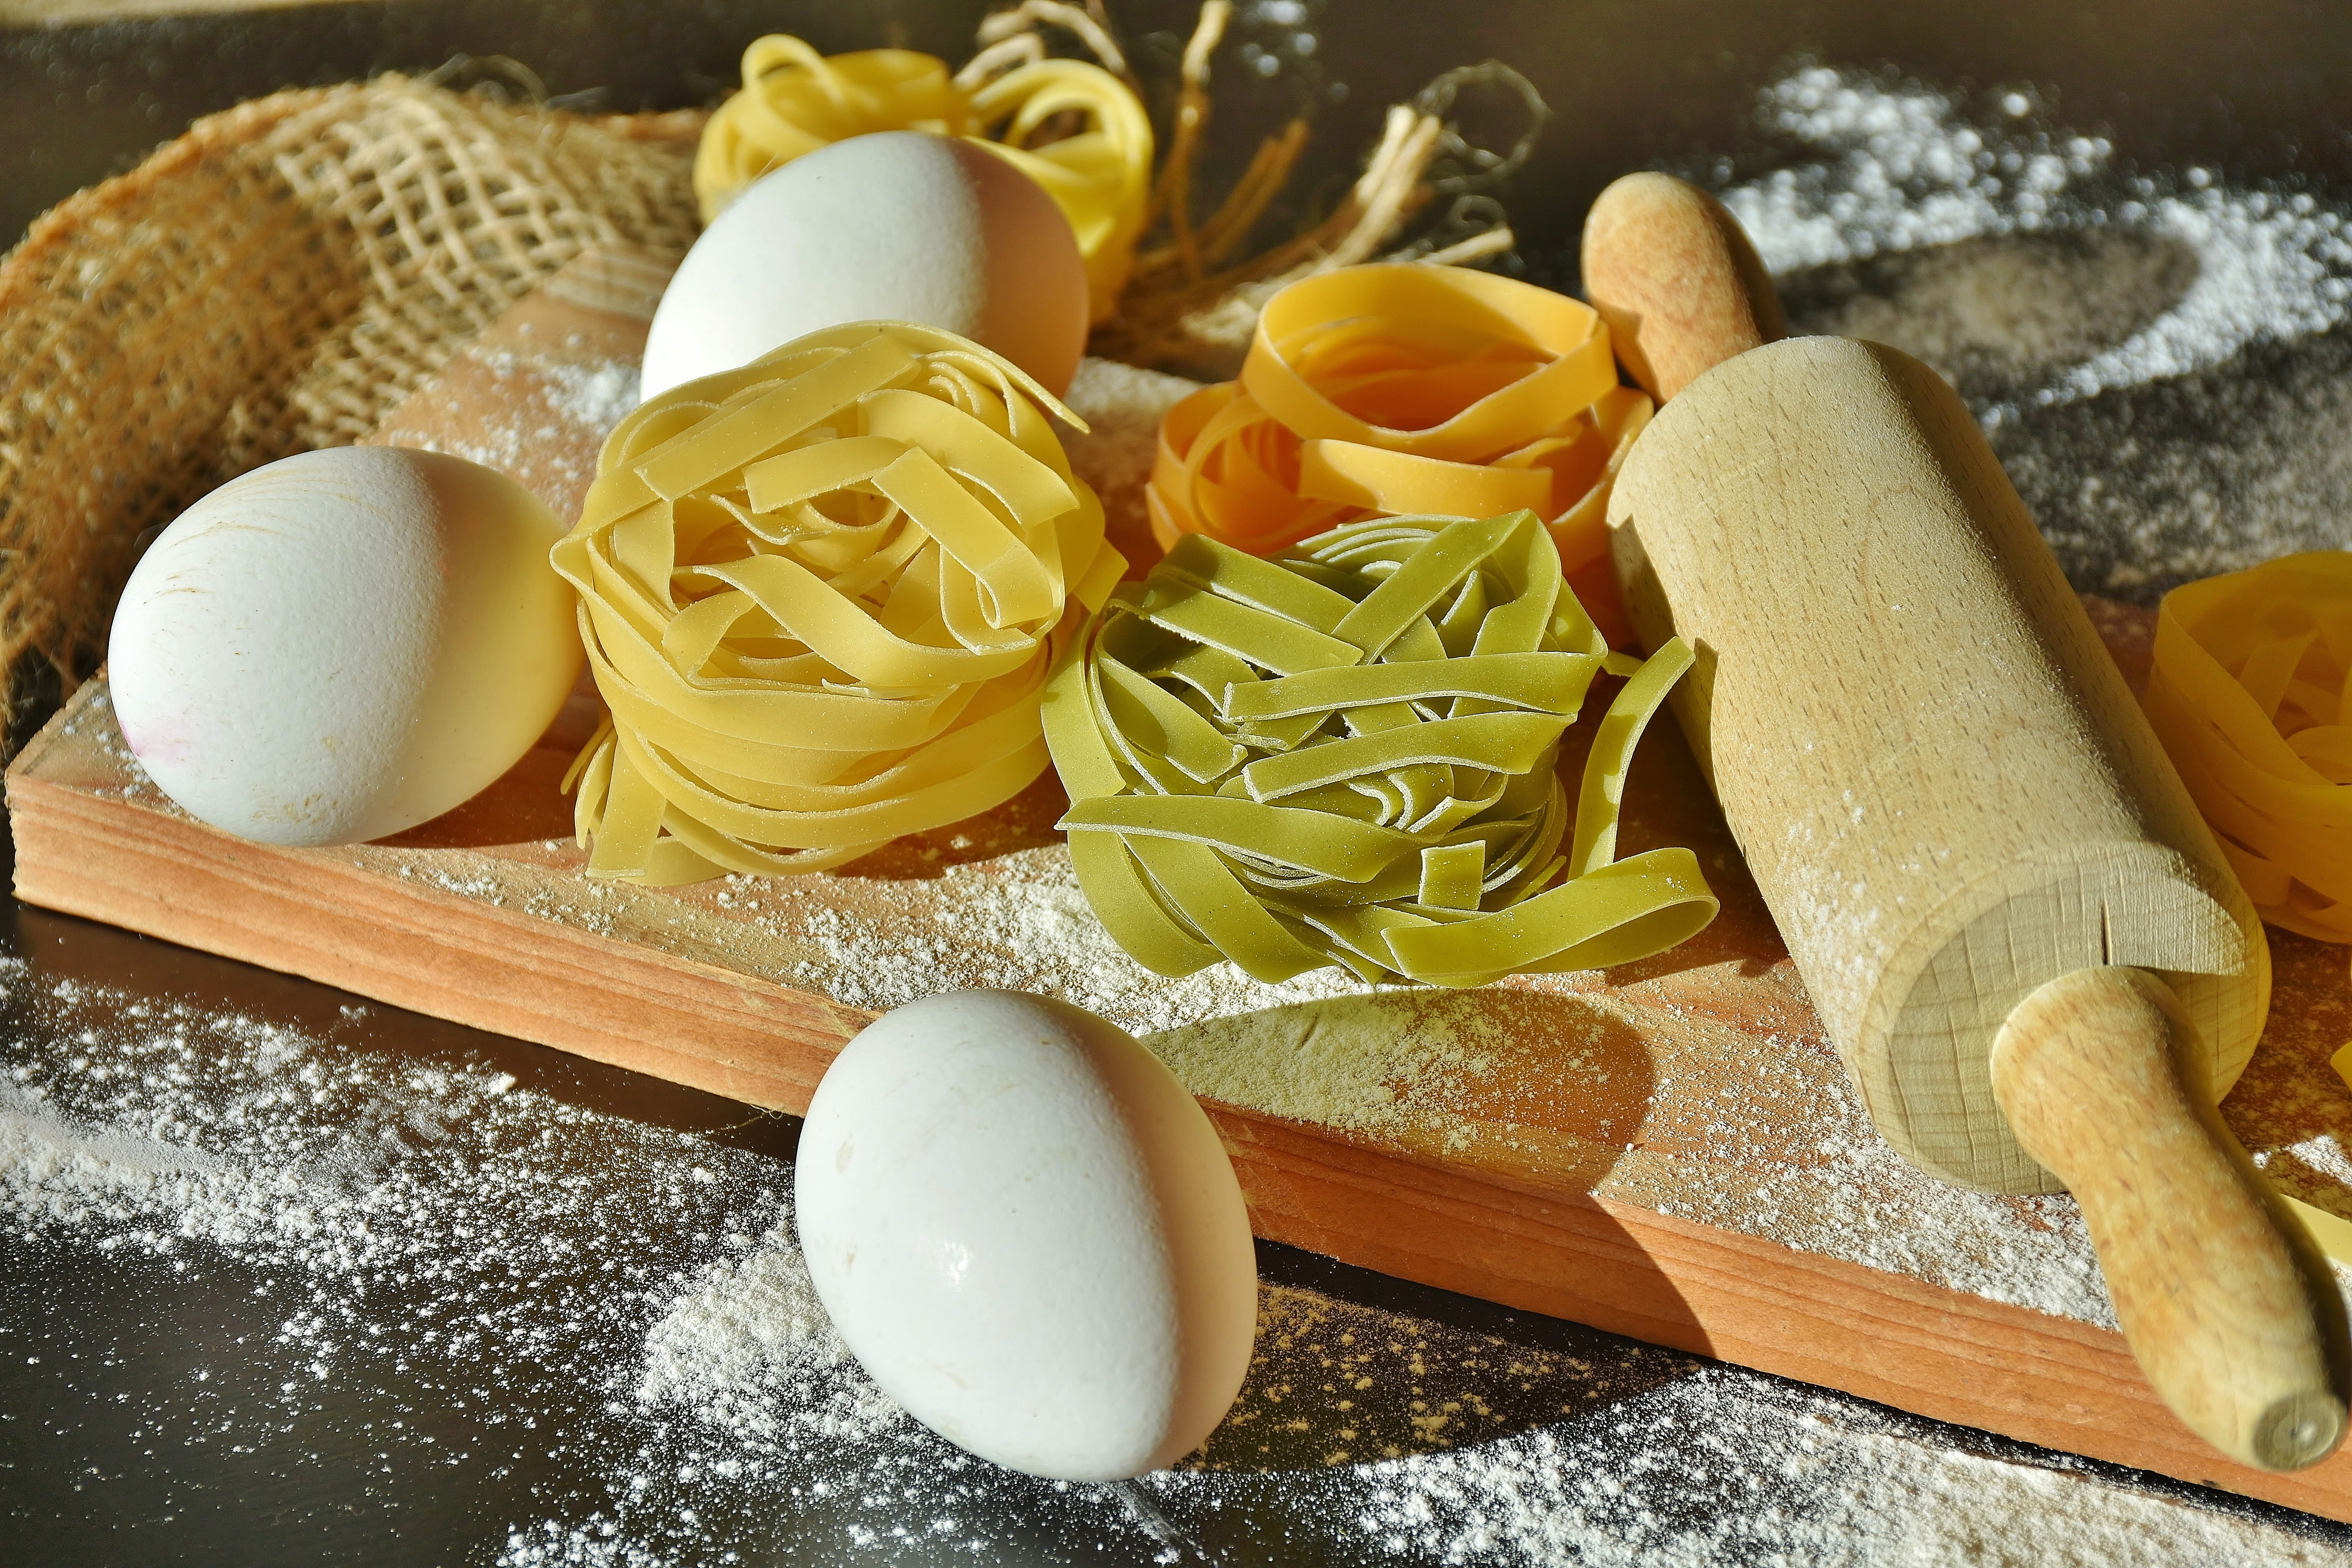 eggs and pasta with wooden rolling pin, noodles, tagliatelle